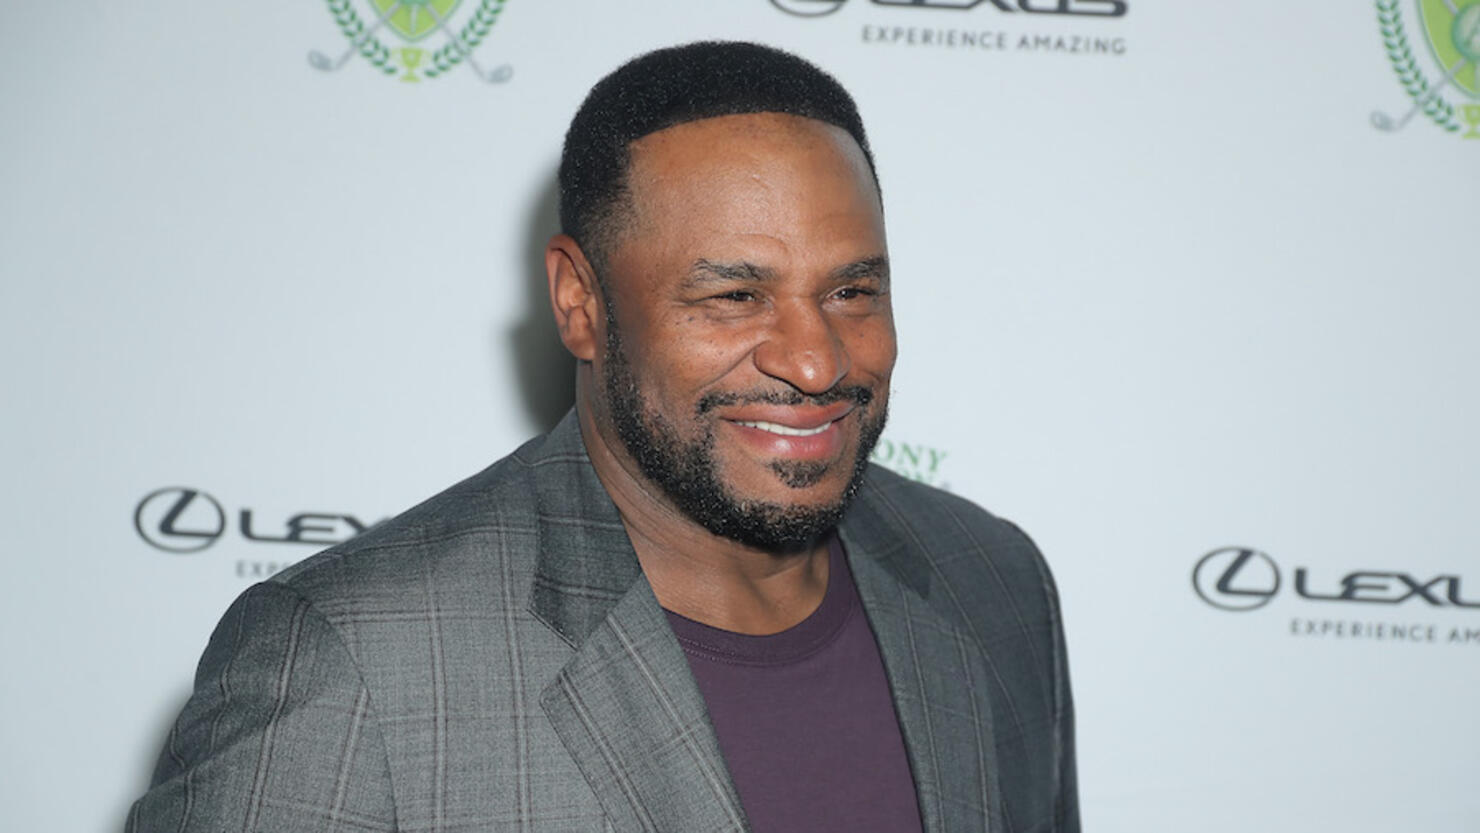 Anthony Anderson's 4th Annual Celebrity Golf Classic: VIP Pairings Party Celebration